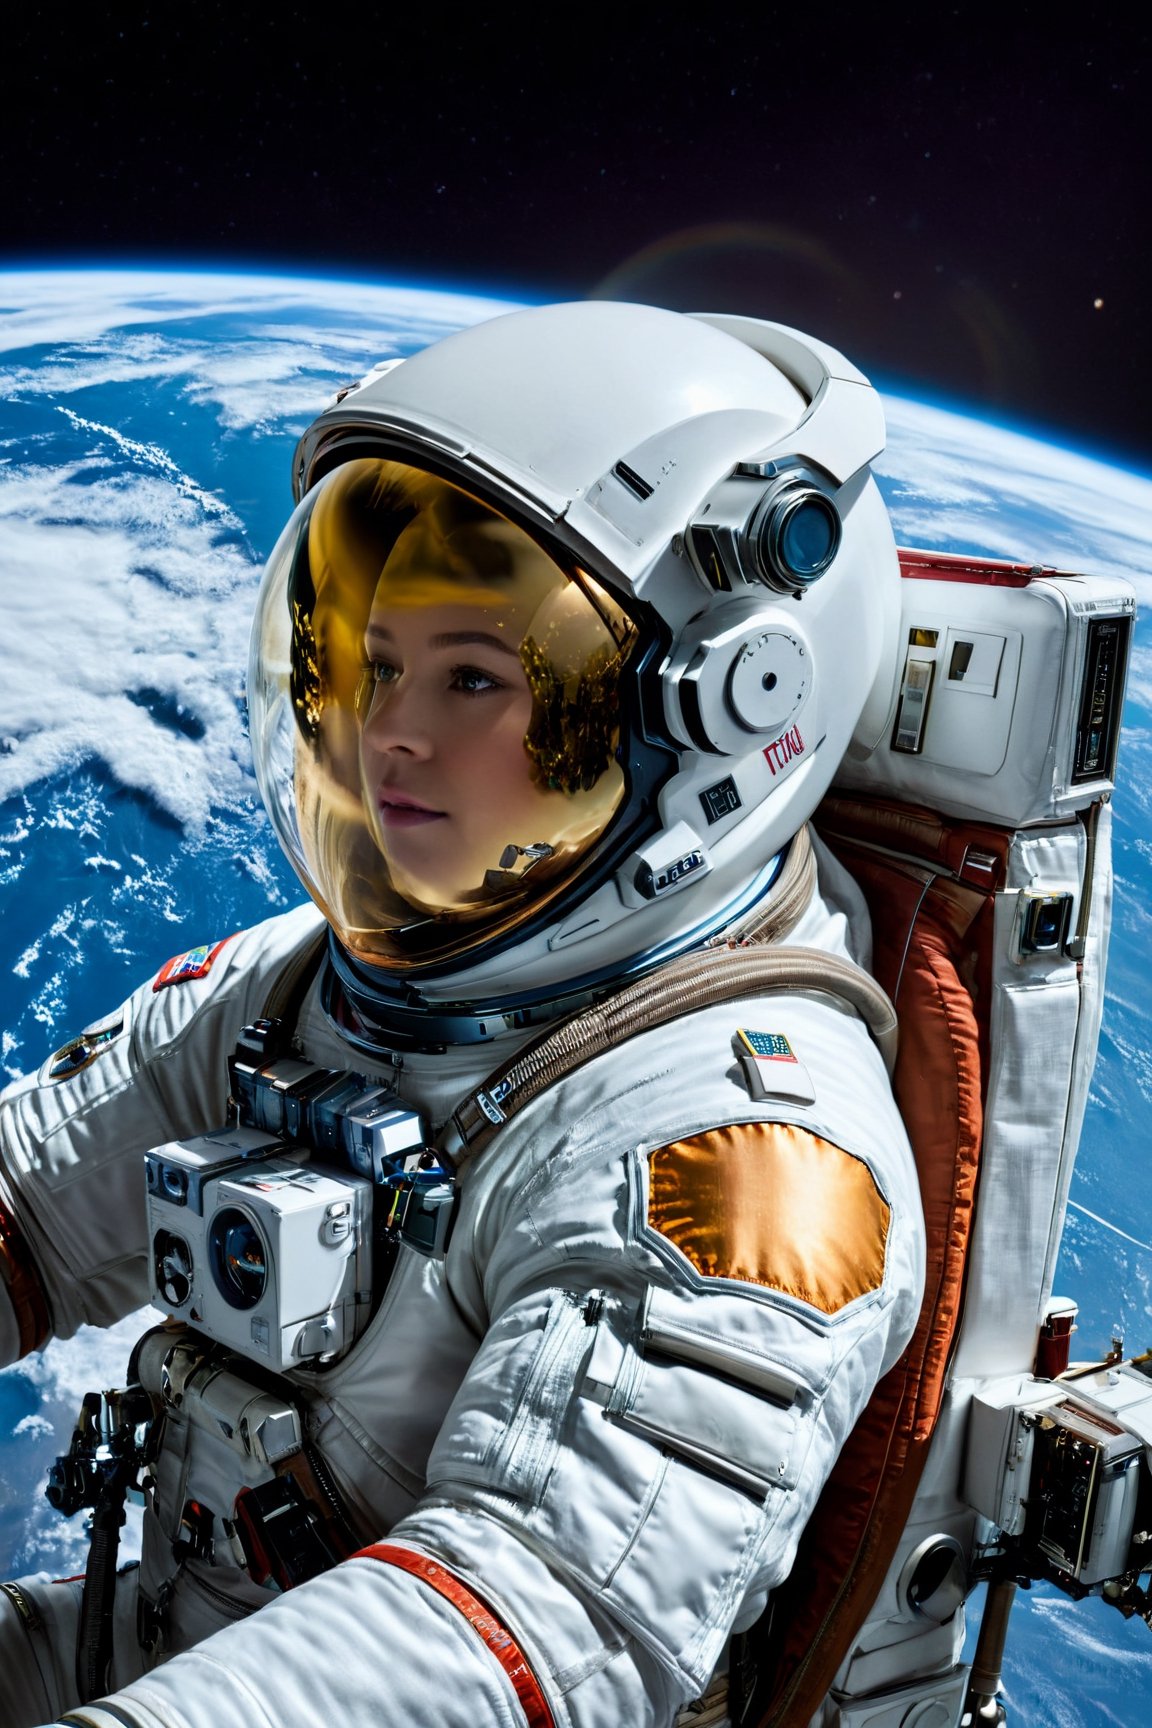 (best quality,4k,8k,highres,masterpiece:1.2),ultra-detailed,(realistic,photorealistic,photo-realistic:1.37),female astronaut,futuristic spacesuit,astronaut helmet,exploration spaceship,grandiose cinematic,outer space backdrop,vivid colors,studio lighting,sharp focus,physically-based rendering,detailed technology equipment,huge glass dome,technological advancements,high-tech control panels,zero-gravity environment,awe-inspiring view of Earth,floating astronaut,star-studded background,cosmic rays,interstellar journey,otherworldly experience,serene and majestic,adventurous and courageous,brilliant vision of the future,lunar exploration,galactic expedition,stellar discovery,ethereal colors,sublime beauty,humanity's triumphant spirit,endless possibilities,luminous celestial bodies,spectacular celestial landscape,inspiring and empowering.